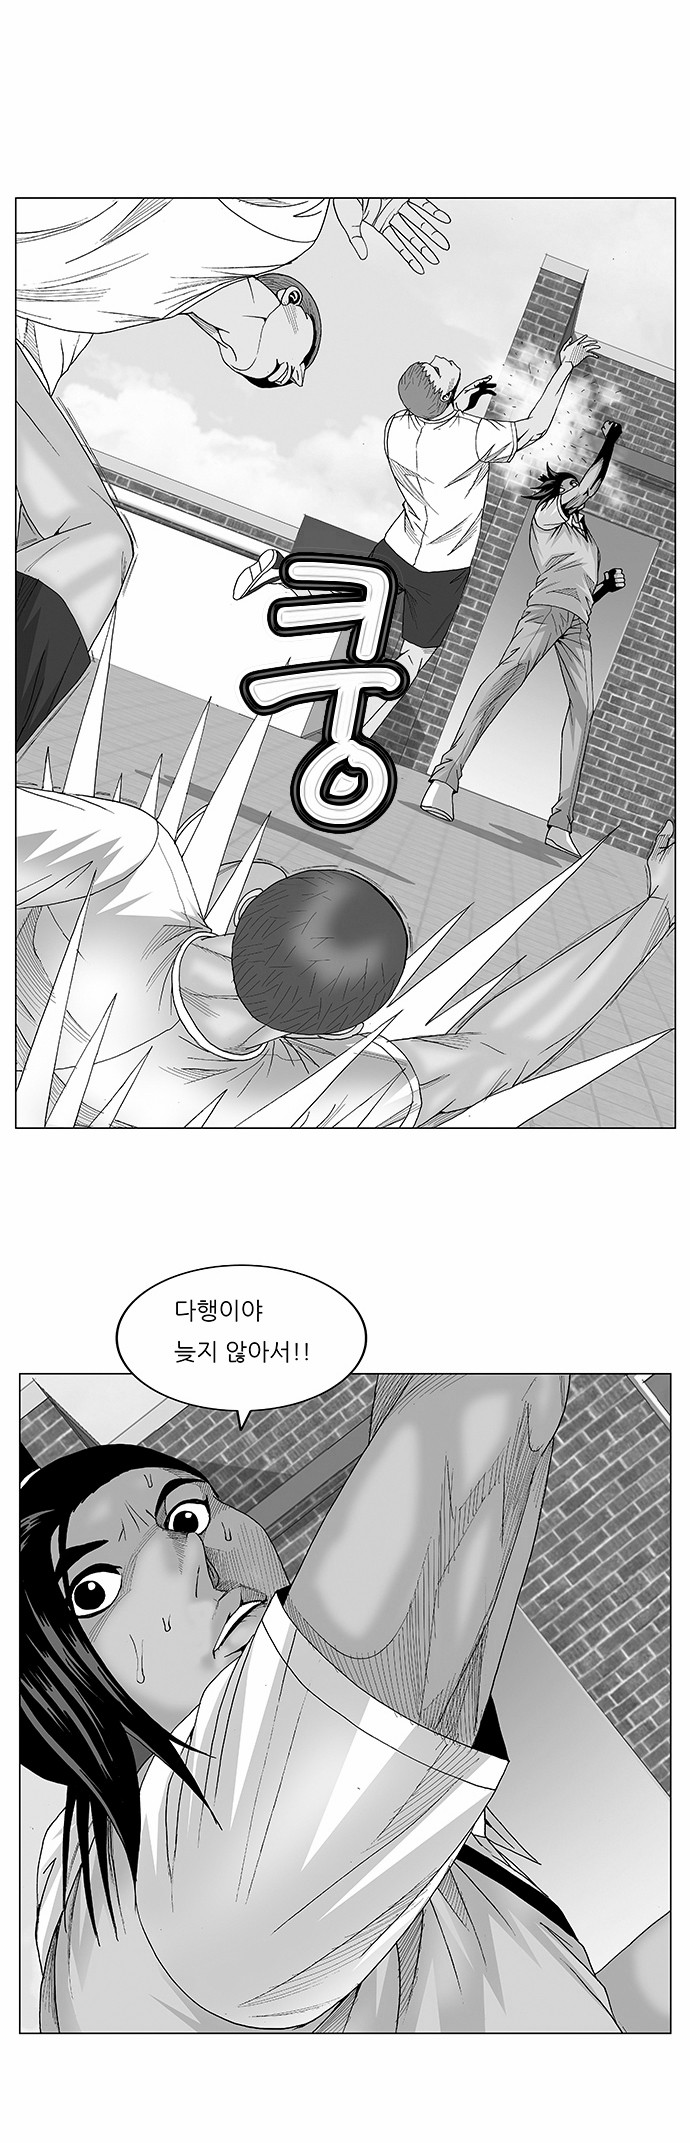 Ultimate Legend - Kang Hae Hyo - Chapter 80 - Page 1